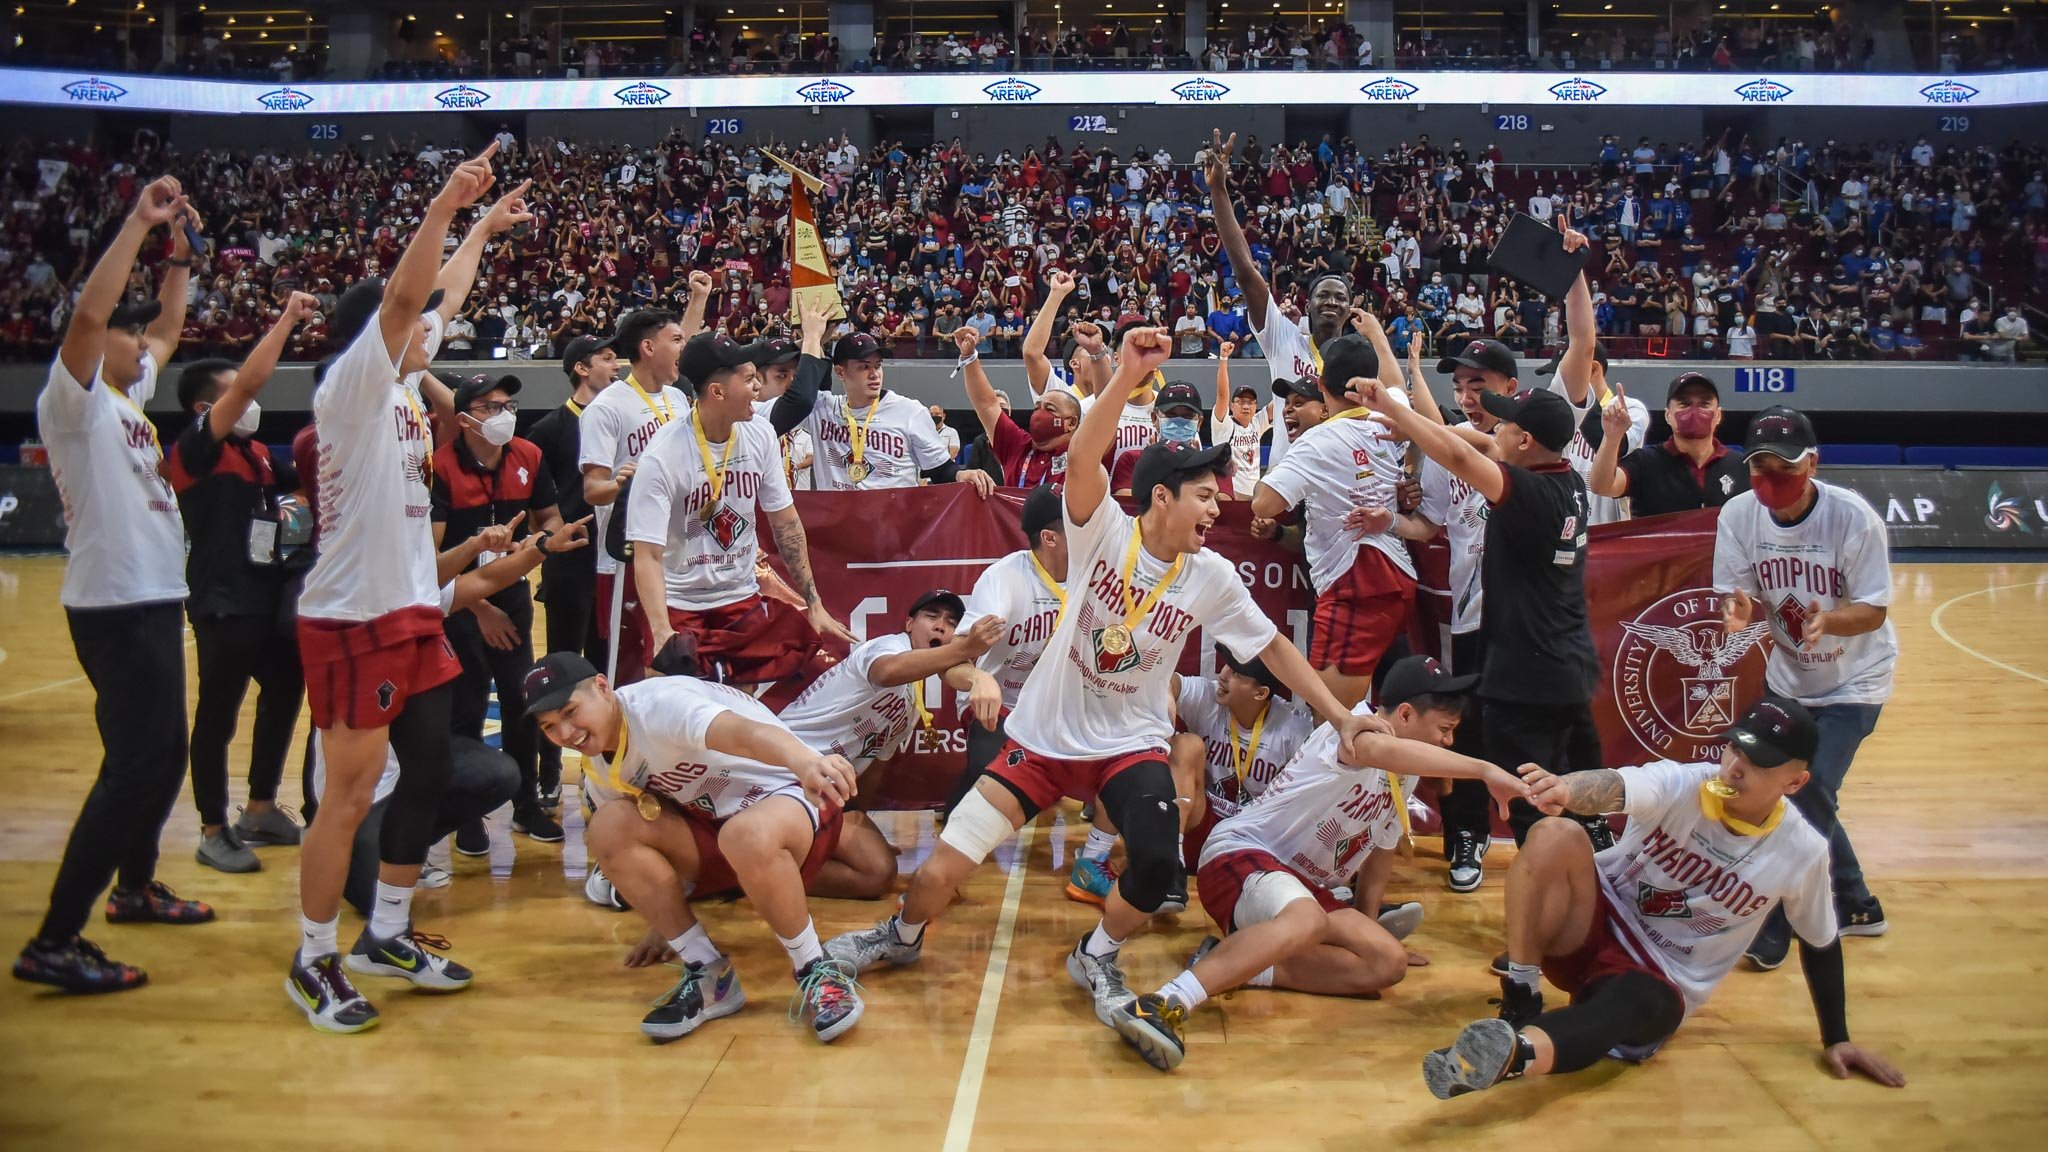 WATCH UP Fighting Maroons end 36 years title drought in UAAP victory vs Ateneo